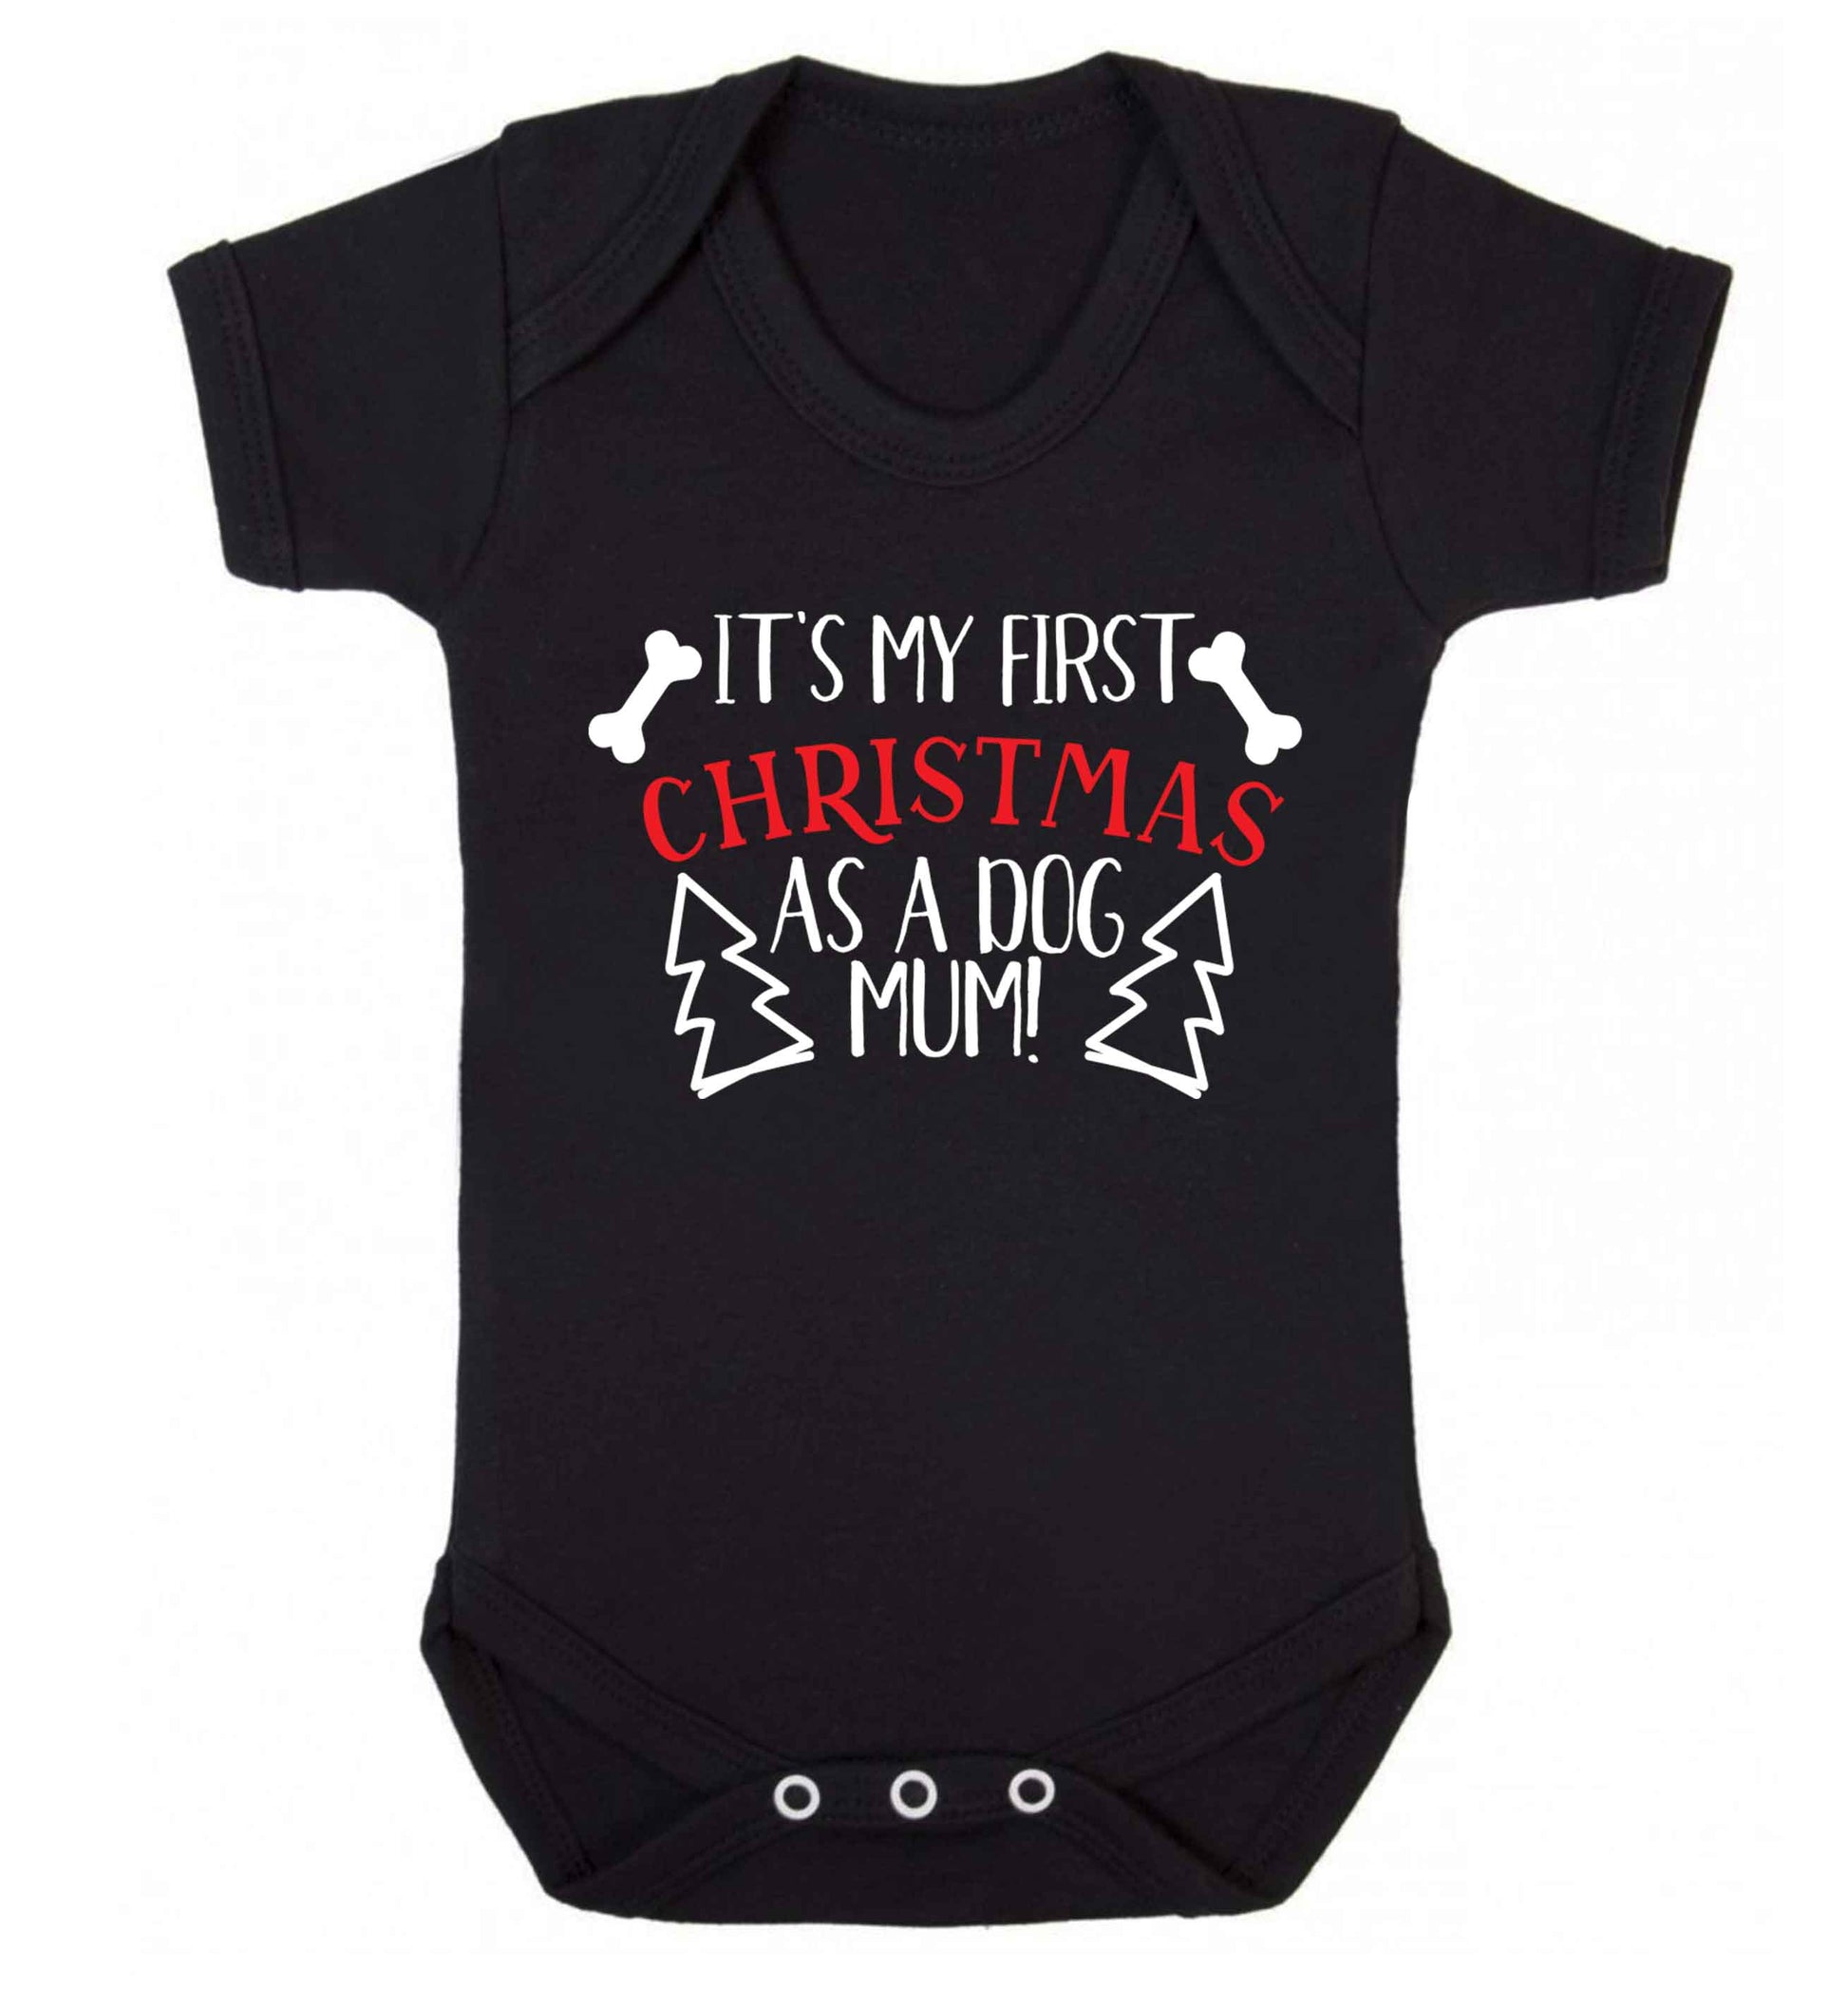 It's my first Christmas as a dog mum! Baby Vest black 18-24 months